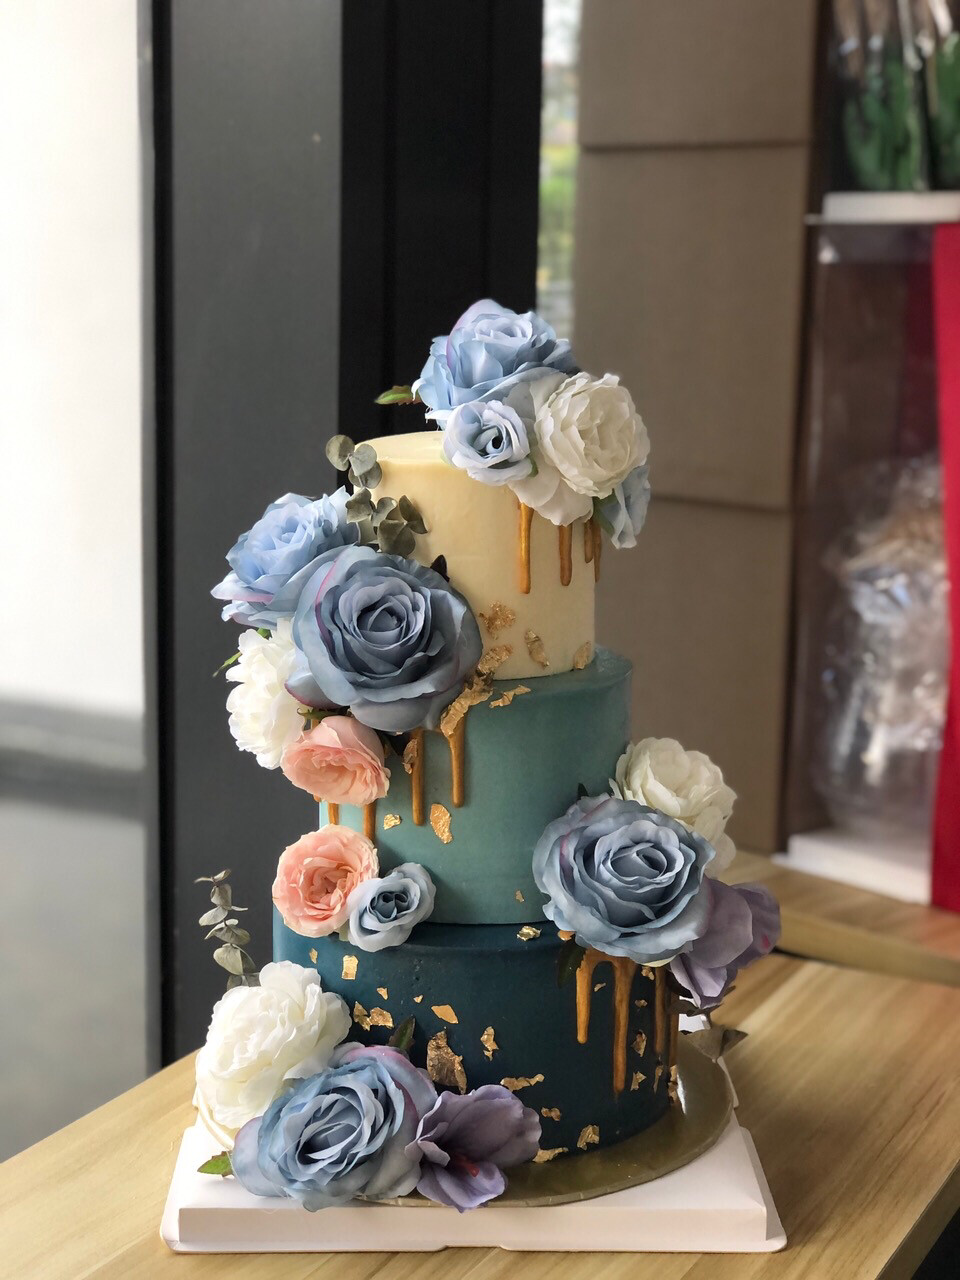 Indie in 2 Or 3 Tiers Cake